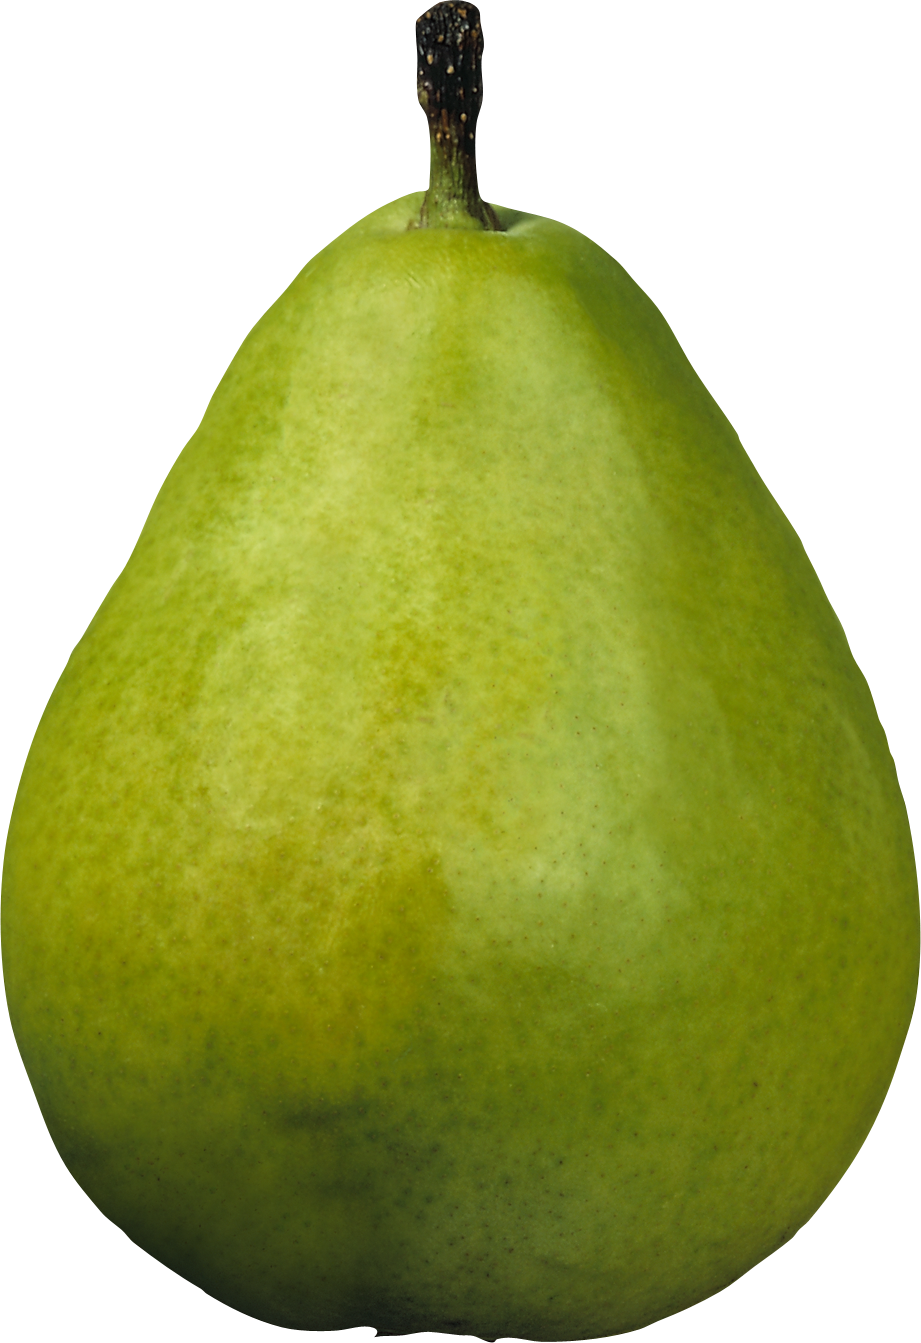 Green pear PNG image